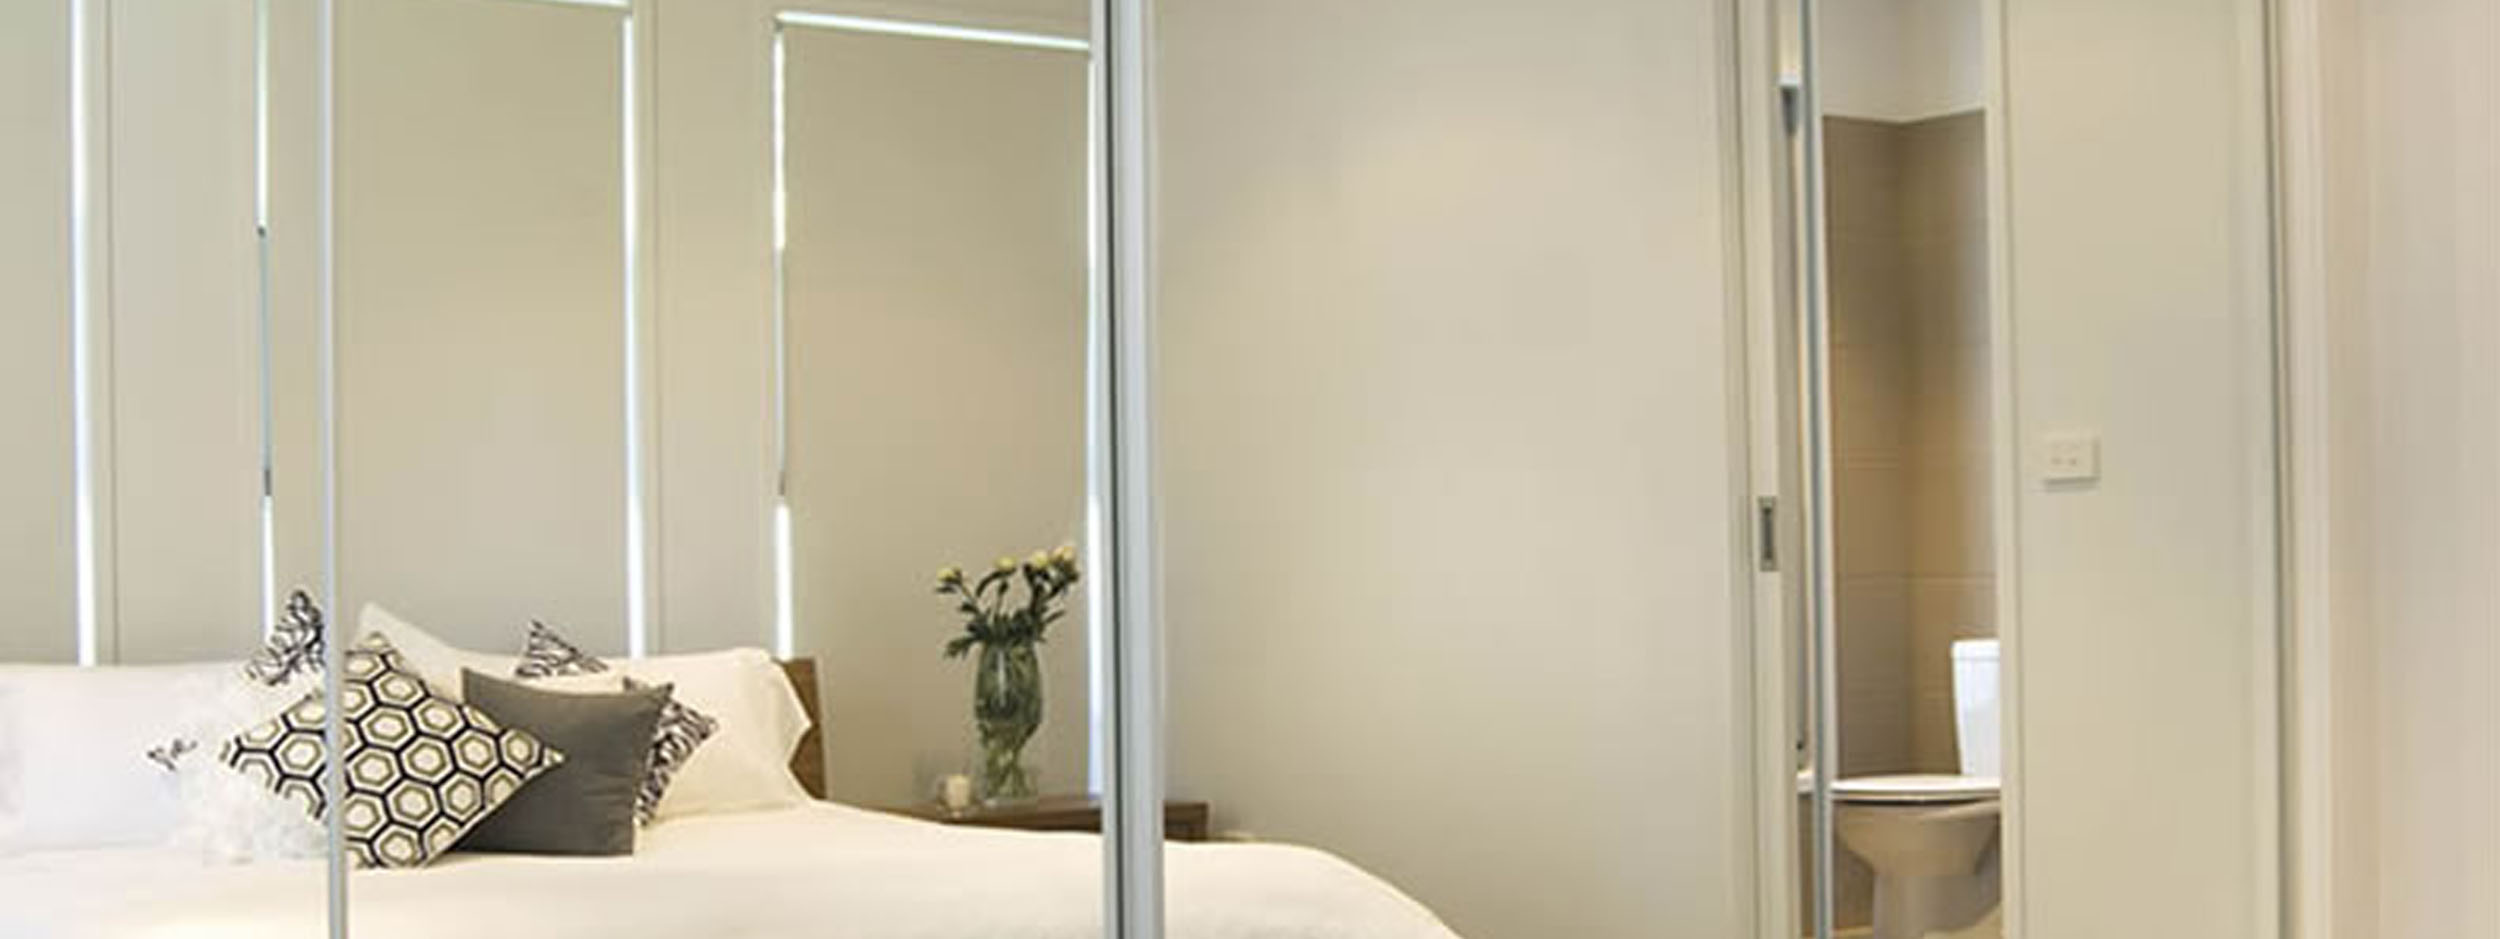 Glass Wardrobes Are a Great Choice for Your Home